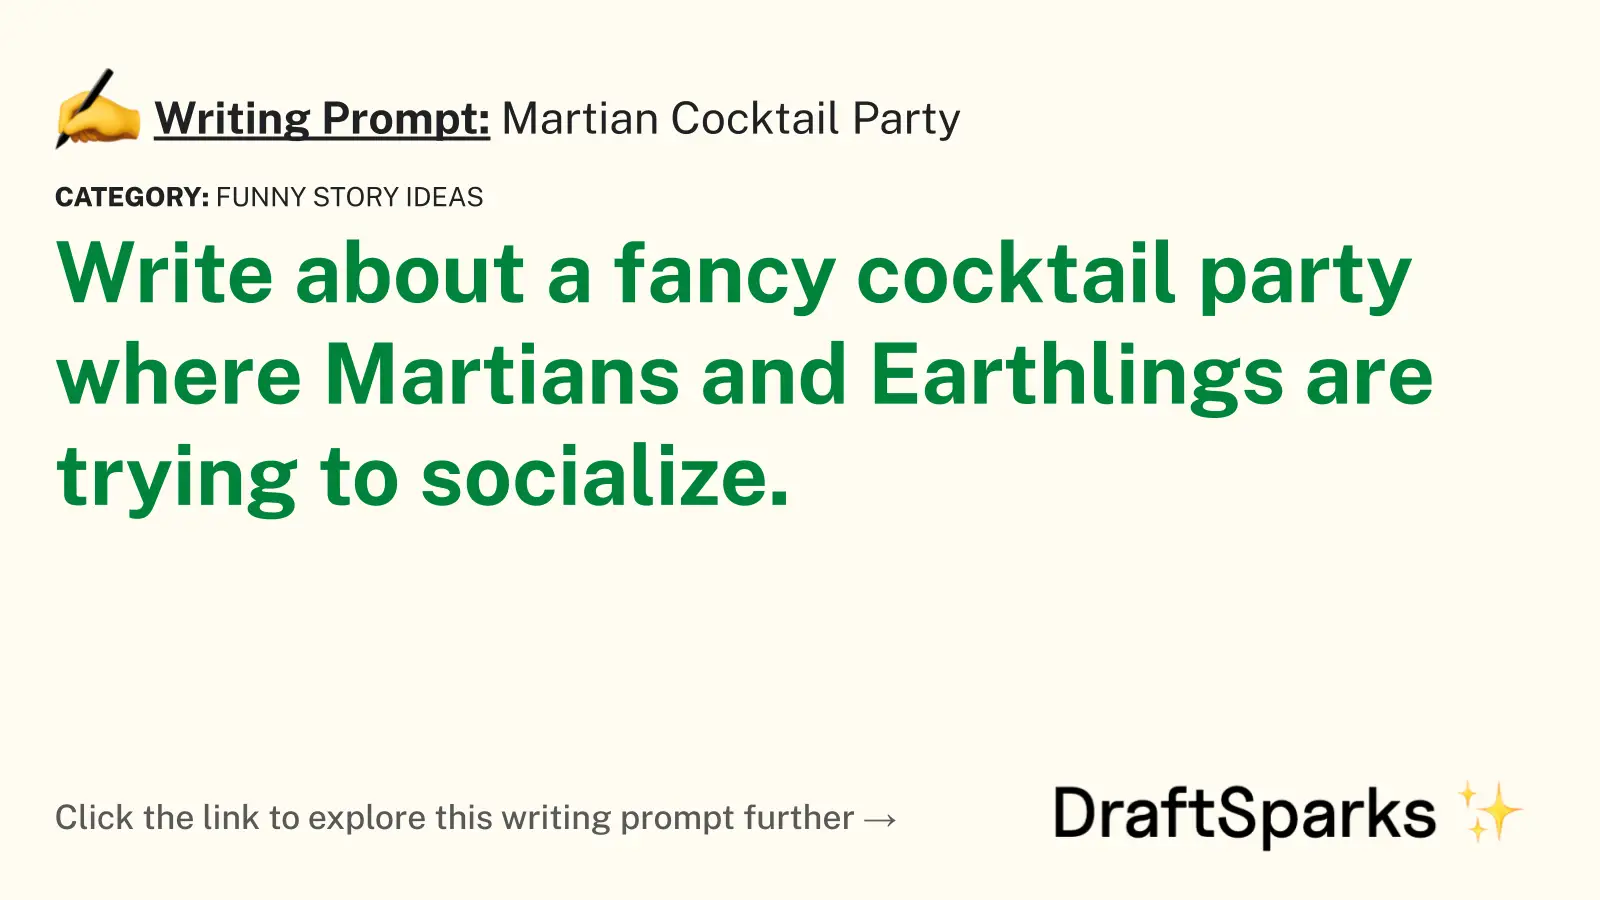 Martian Cocktail Party